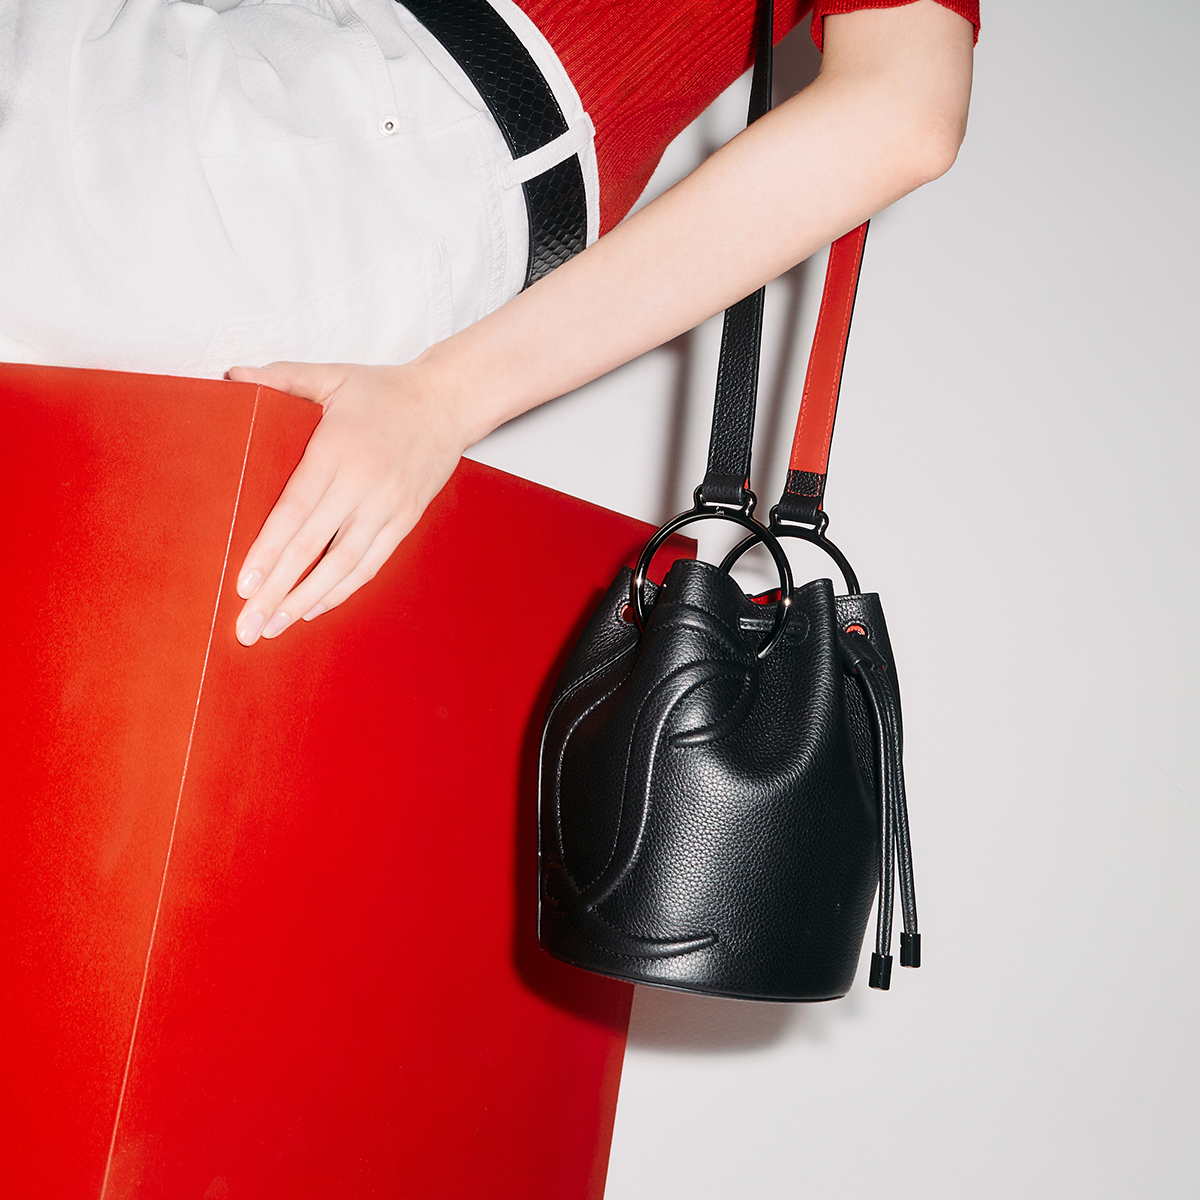 CHRISTIAN LOUBOUTIN: By My Side bag in grained leather - Leather